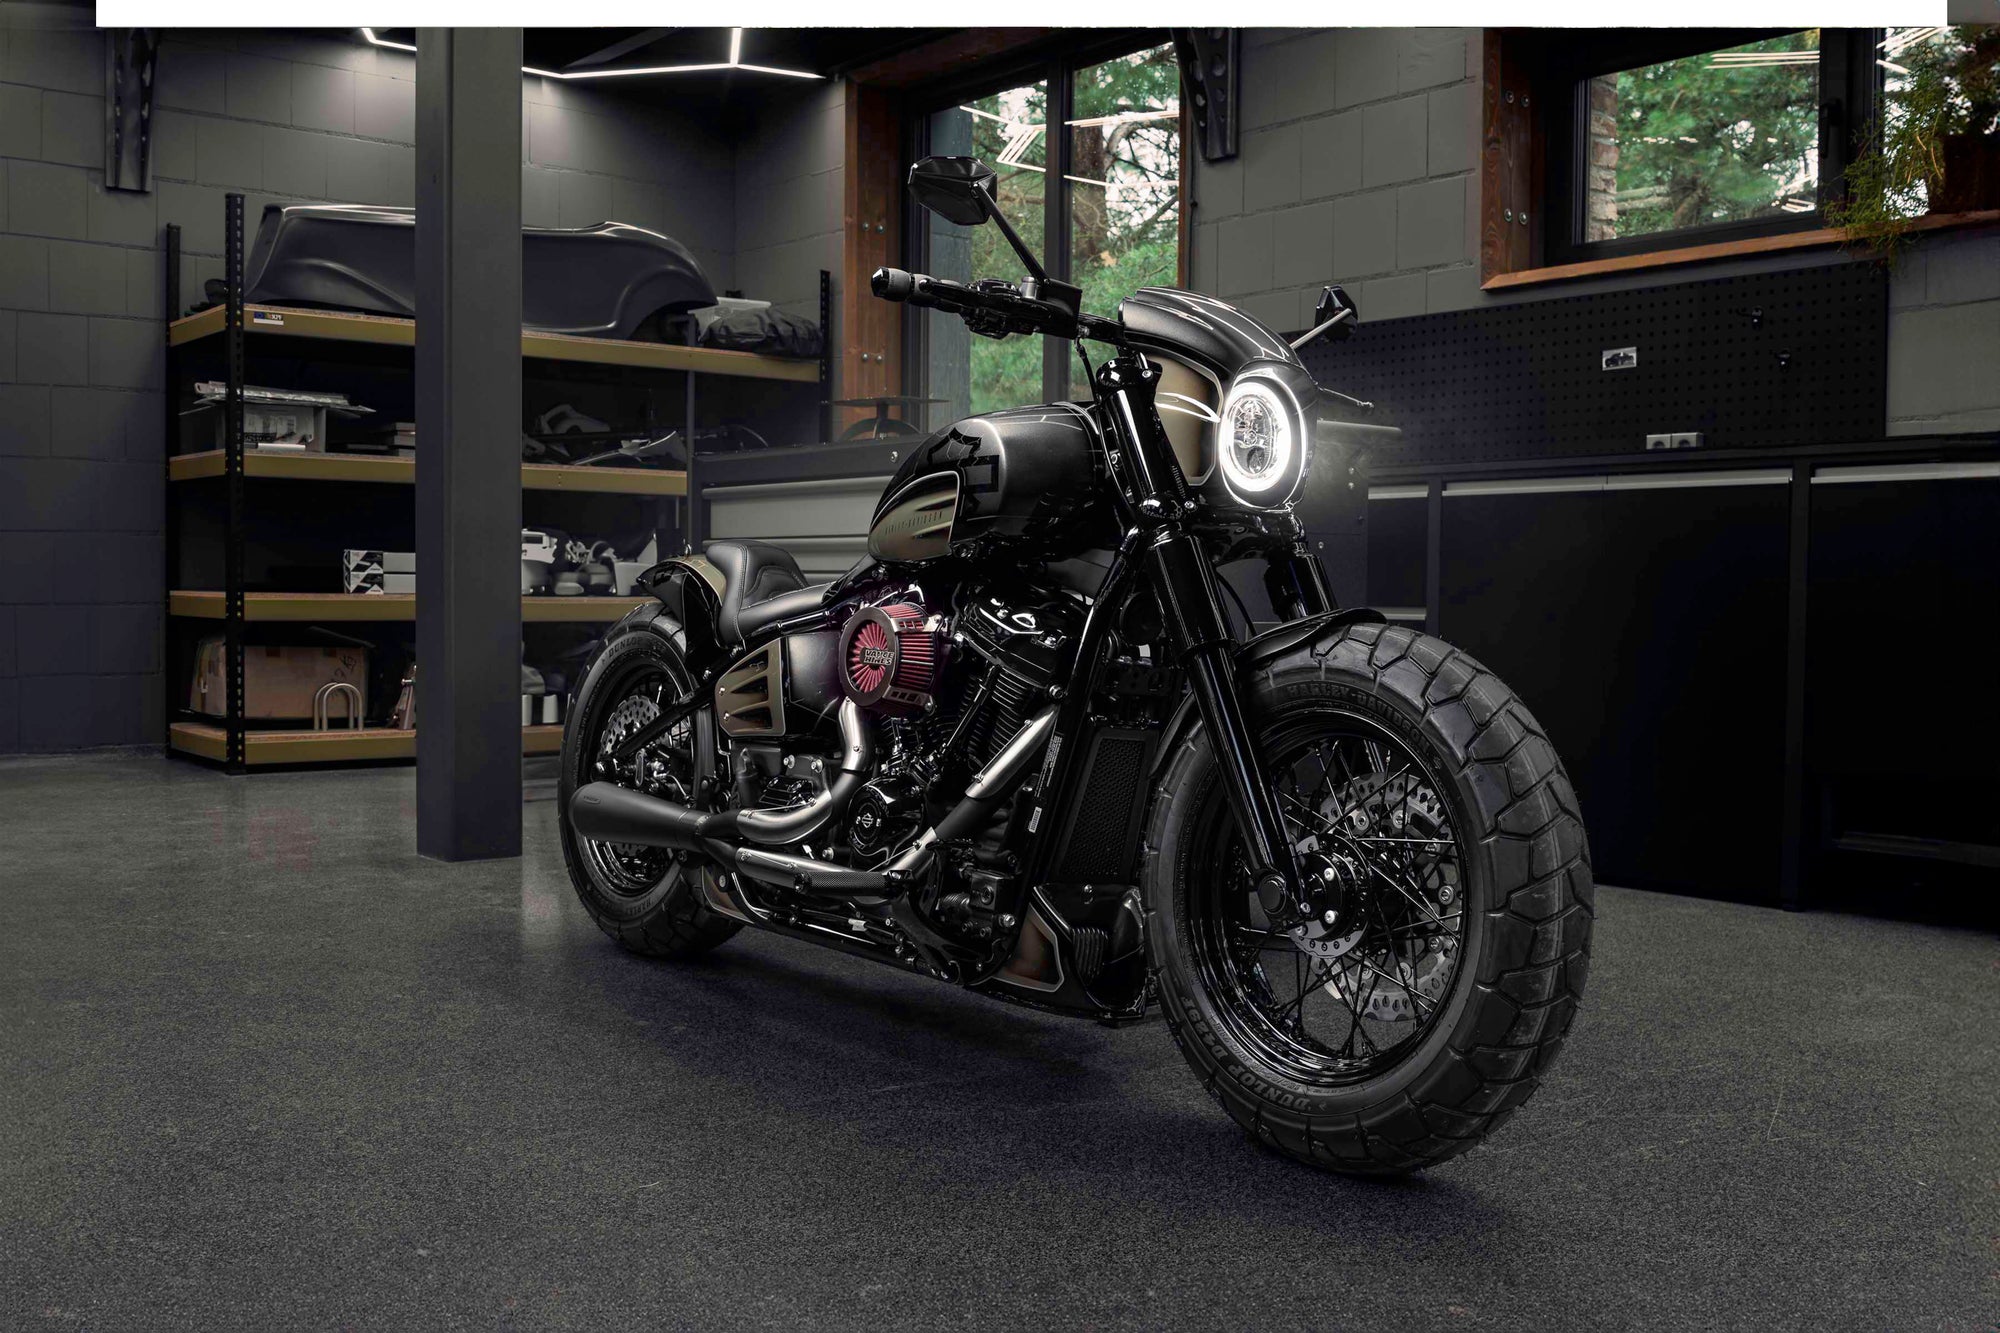 Harley Davidson motorcycle with Killer Custom parts from the front in a modern bike shop